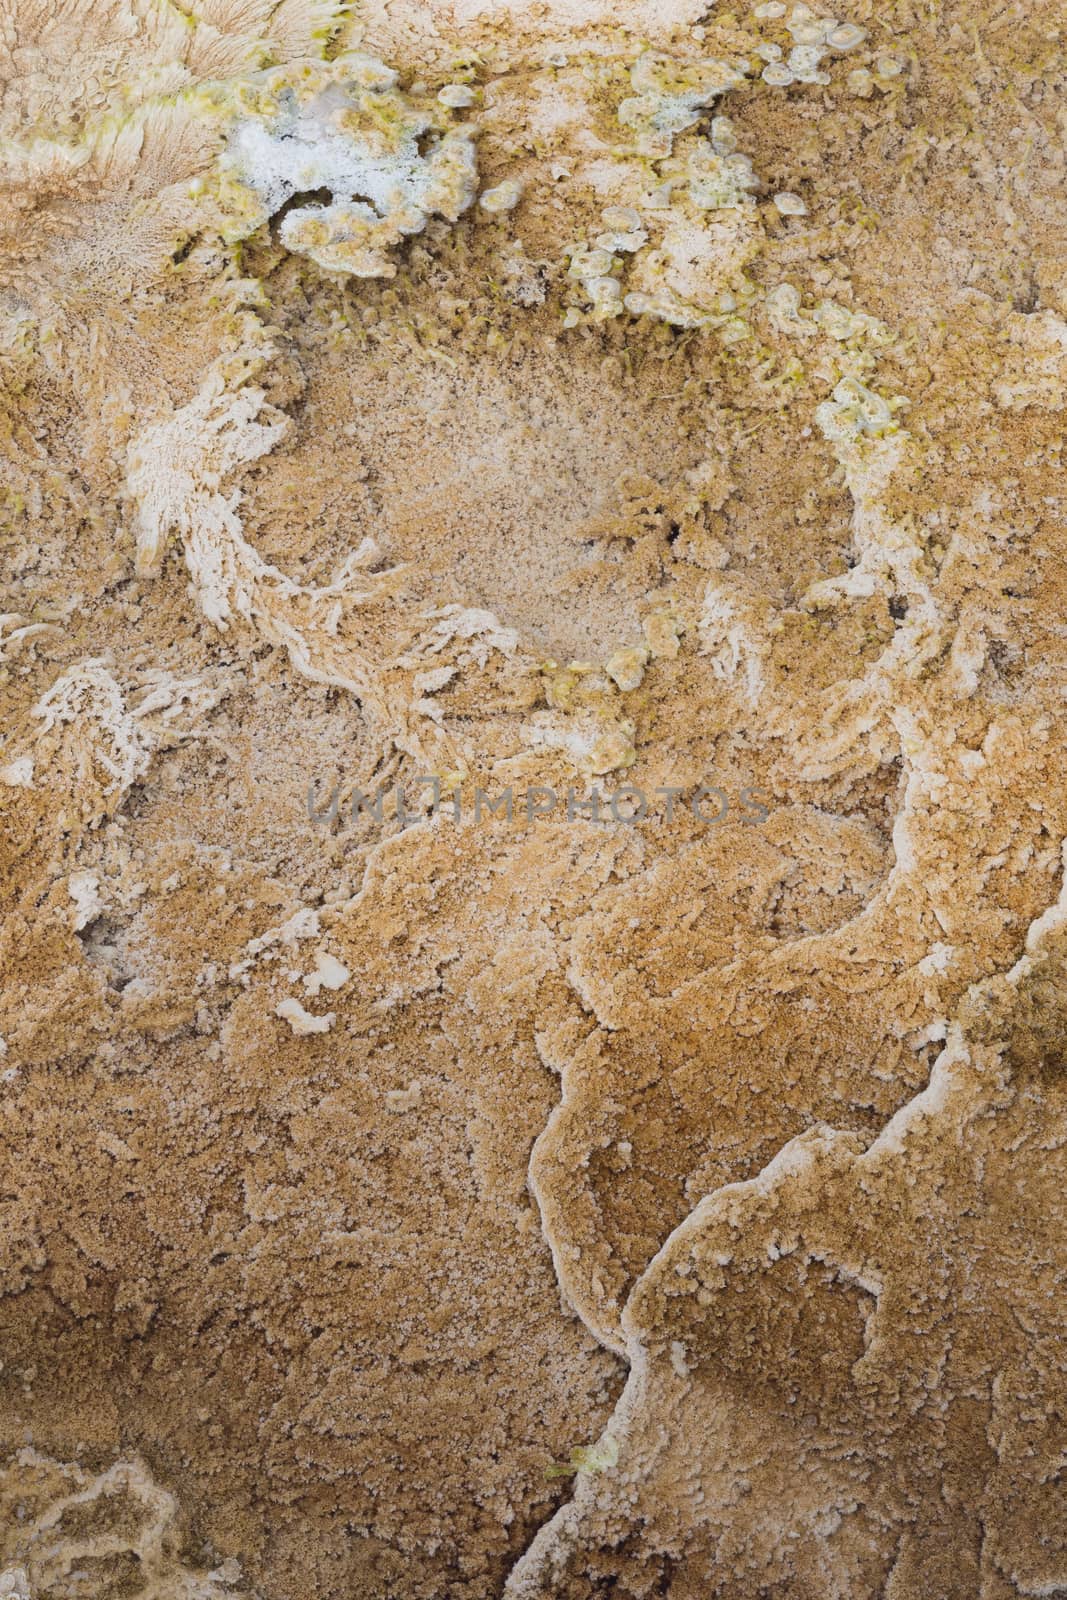 Closeup of bacteria and minerals at Mammoth Hot Springs.